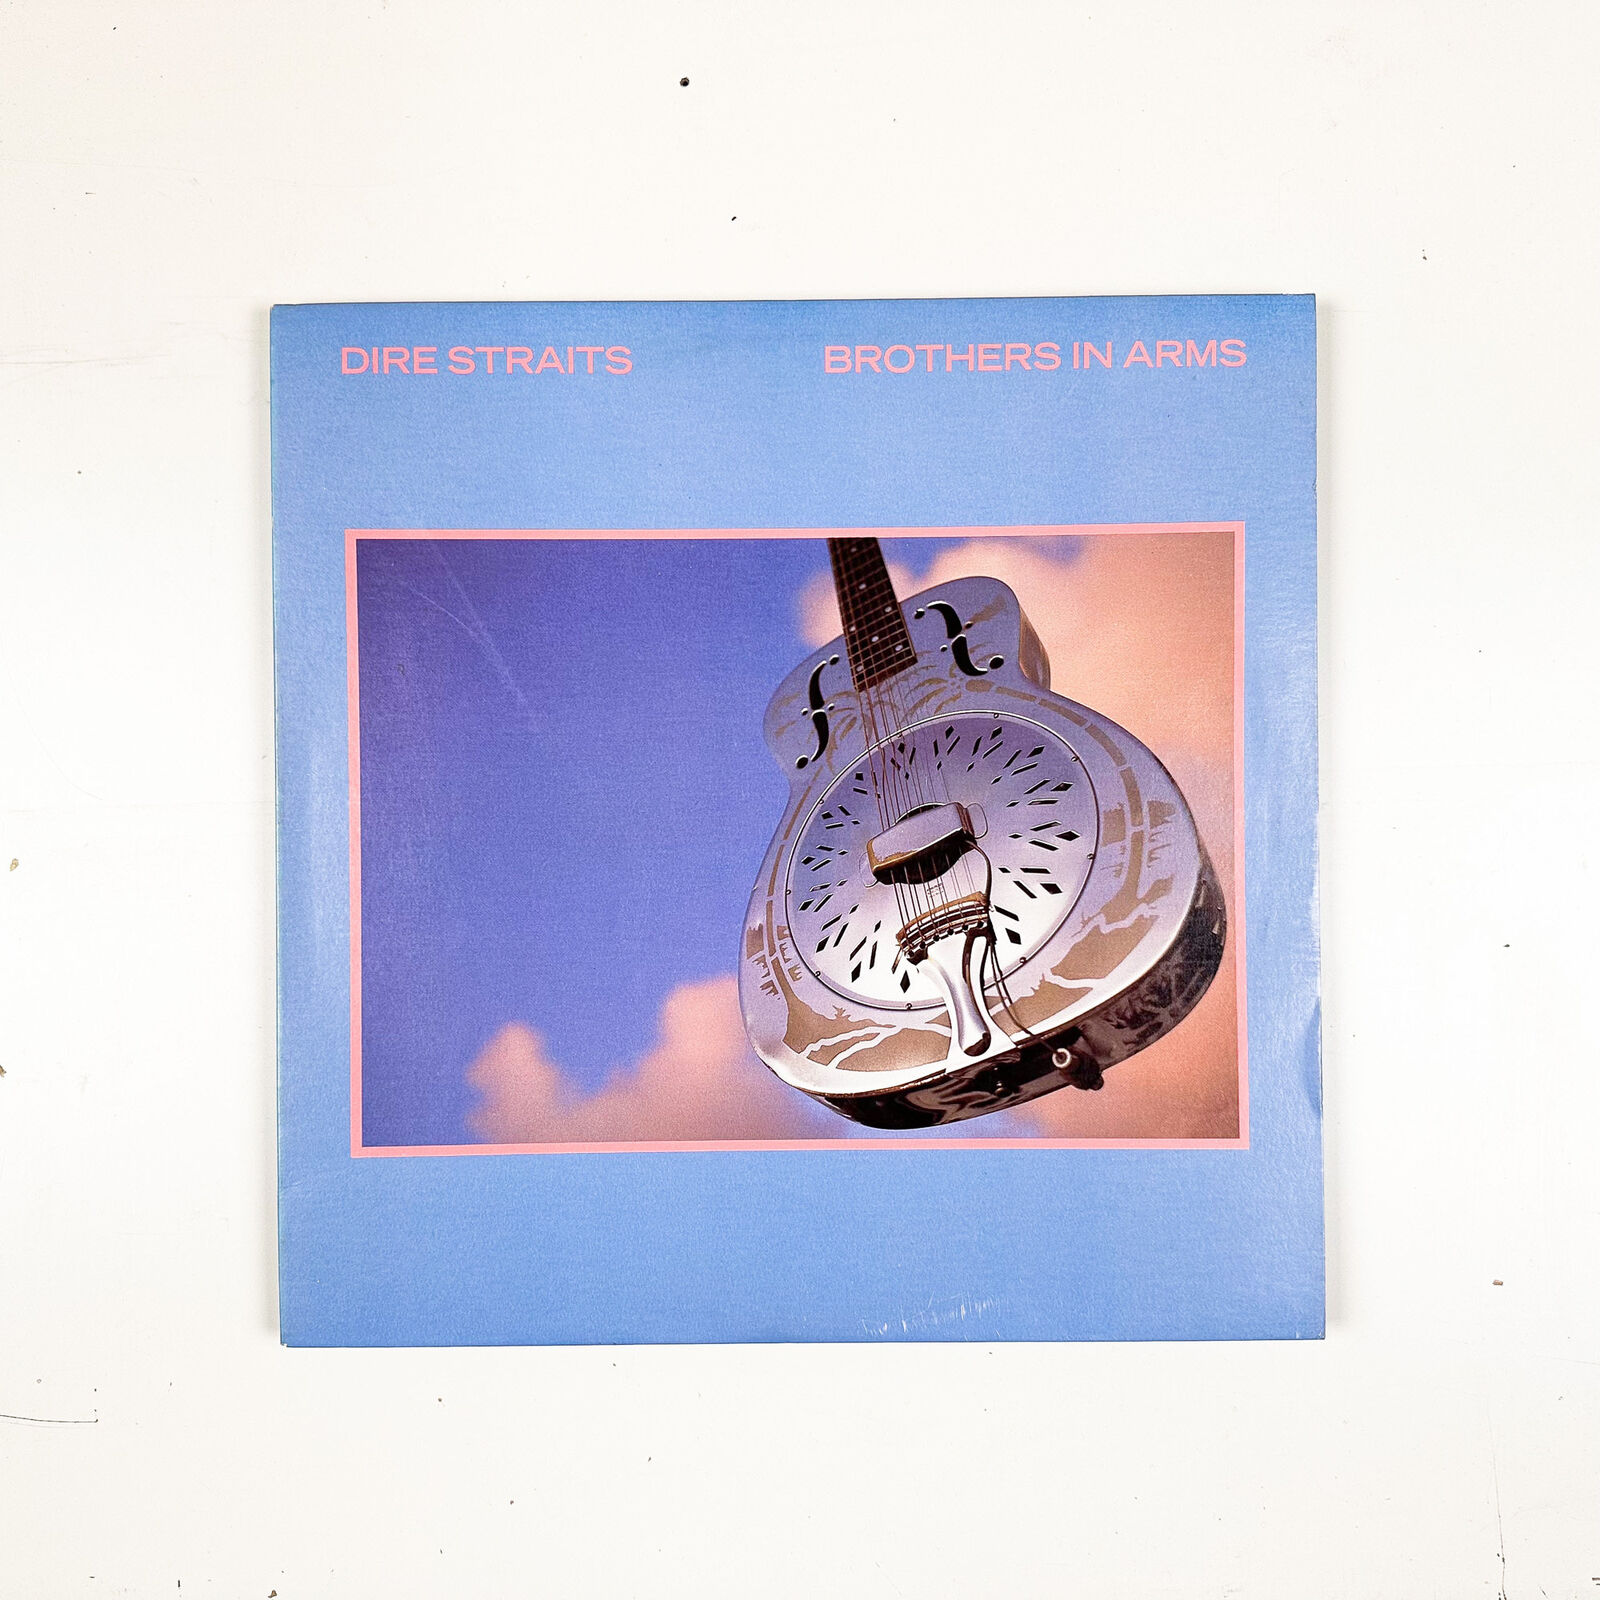 Dire Straits - Brothers In Arms - Vinyl LP Record - 1985